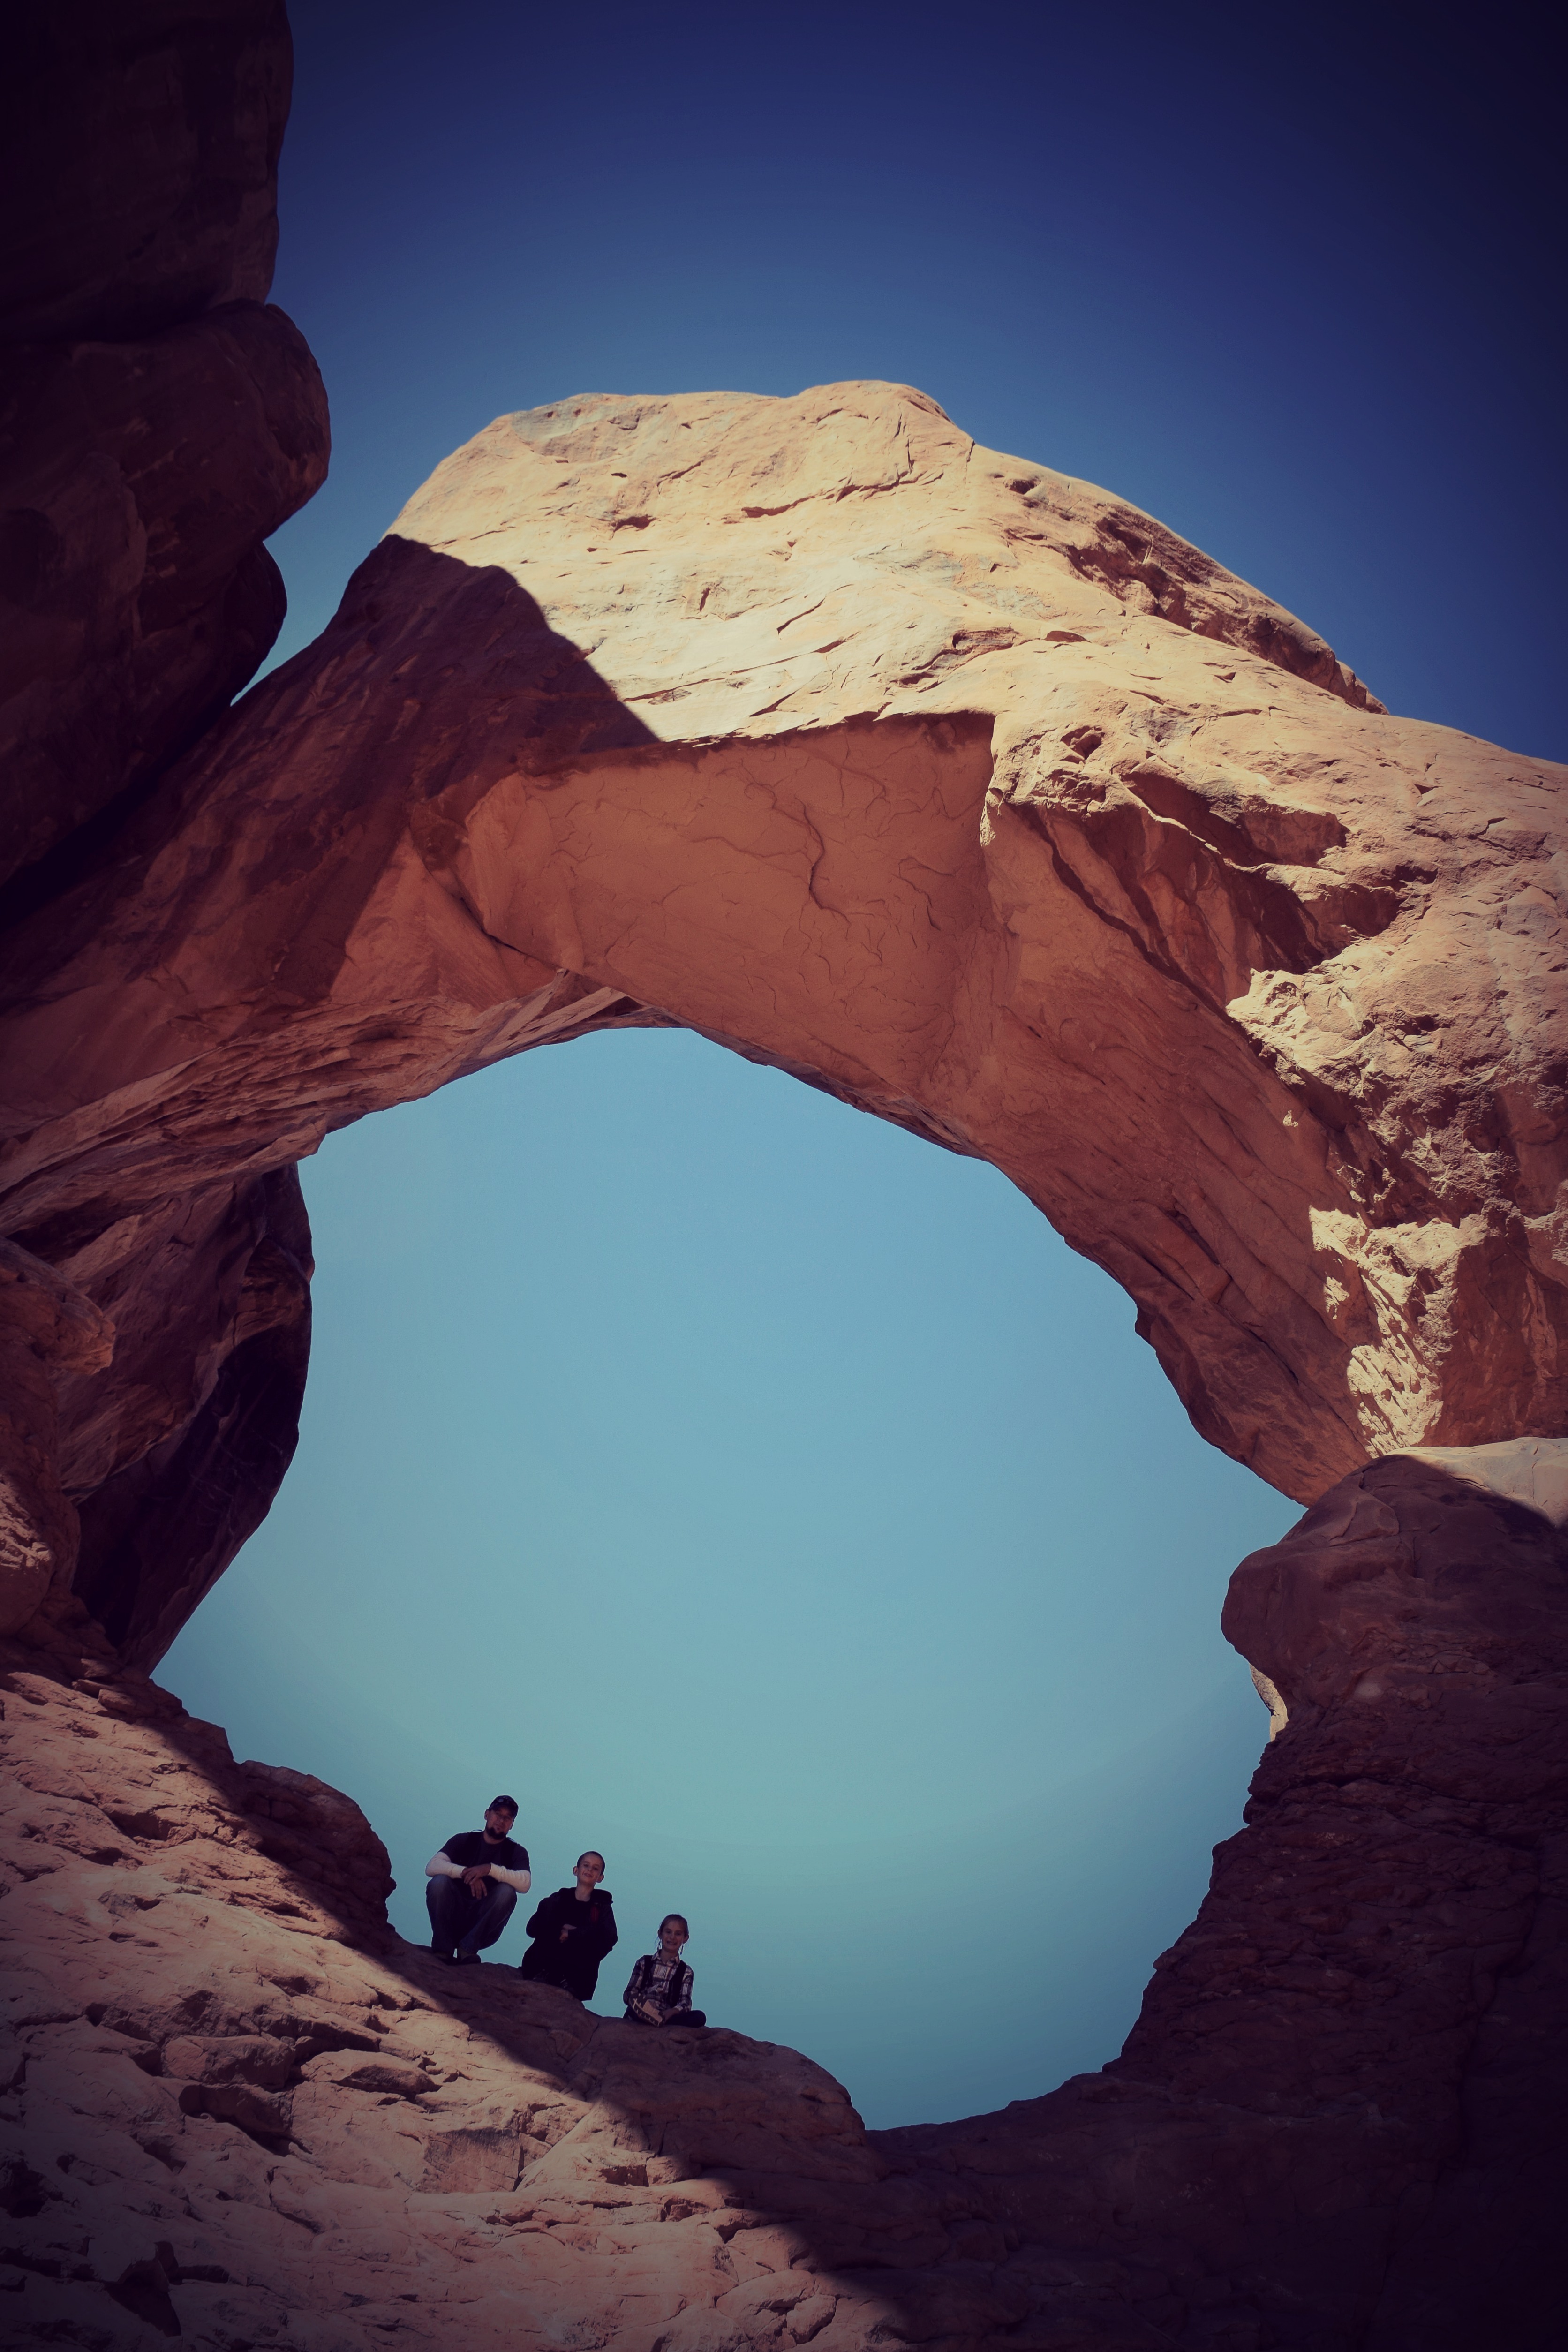 Delicate Arch and Beyond